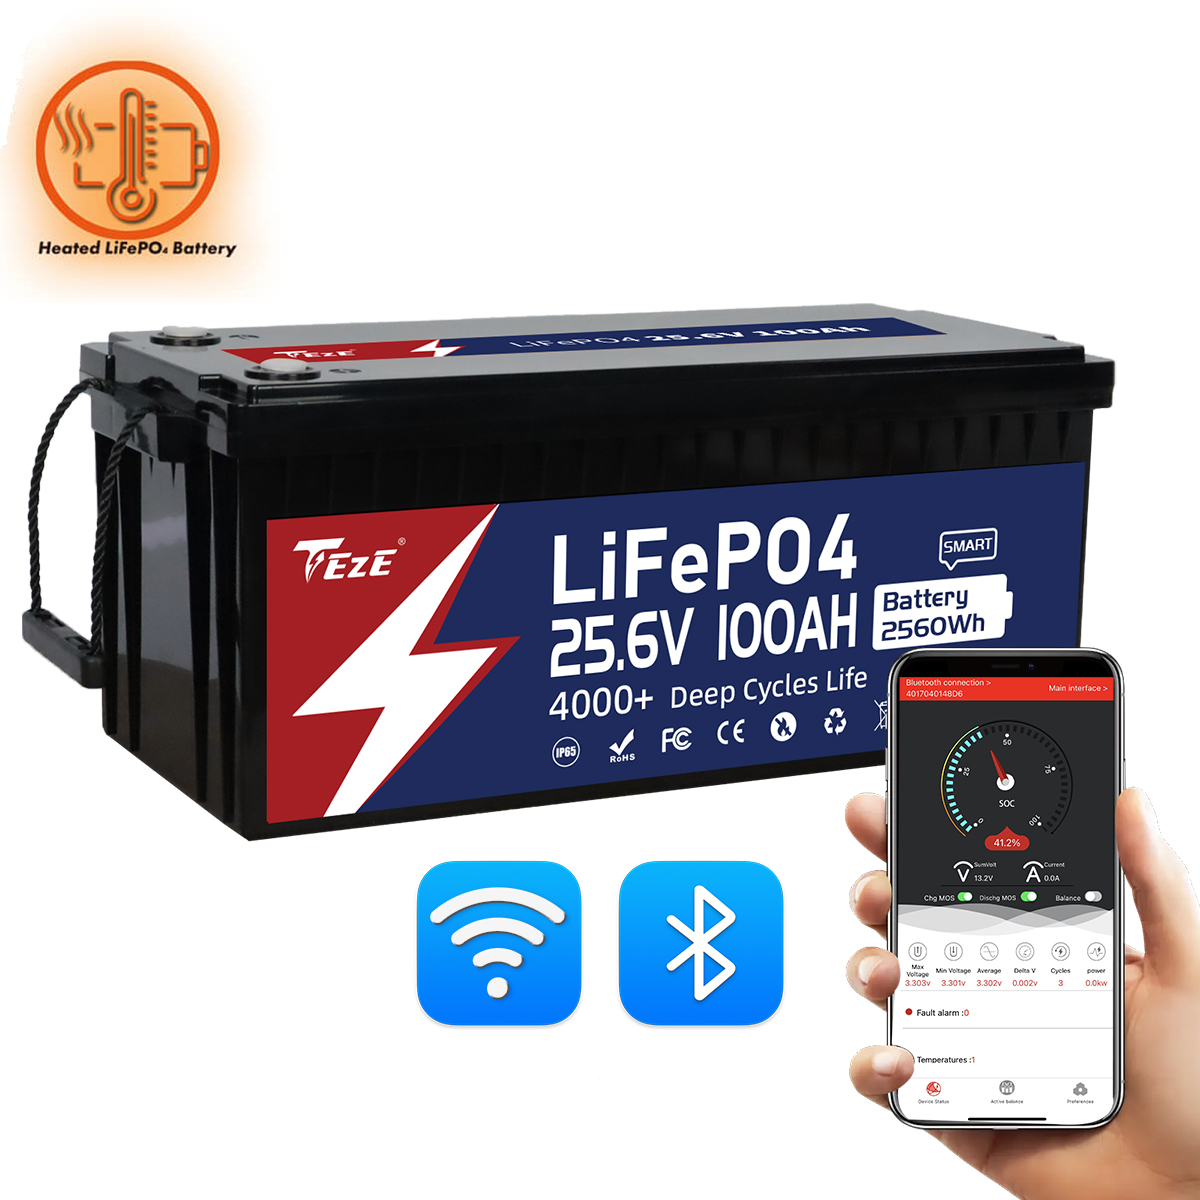 New Add WiFi-TezePower 24V 100Ah LiFePO4 Battery with WiFi and Bluetooth, Self-heating and Active Balancer, Built-in 100A Daly BMS(WiFi Built-in Version)-TezePower